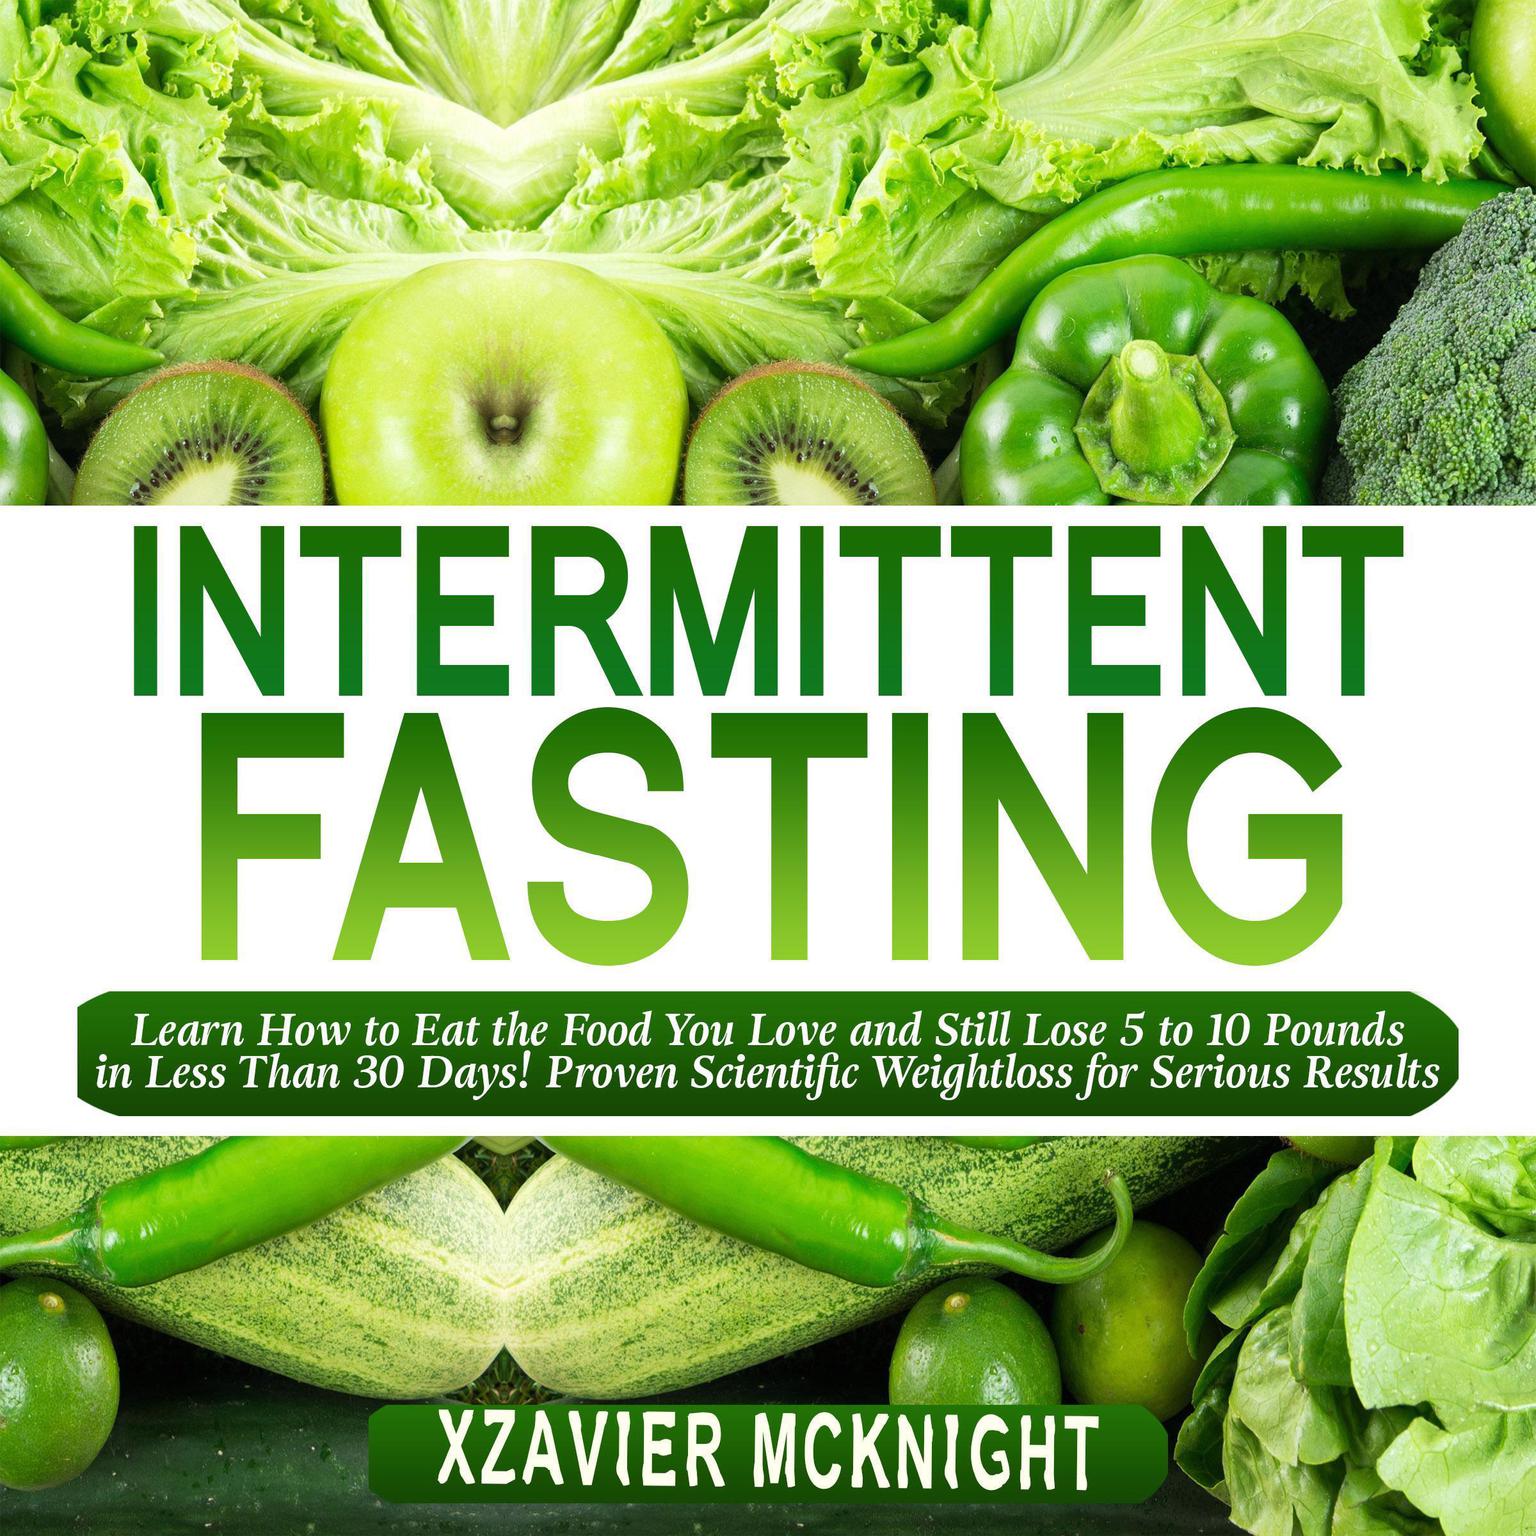 Intermittent Fasting: Learn How to Eat the Food You Love and Still Lose 5 to 10 Pounds in Less Than 30 Days! Proven Scientific Weightloss for Serious Results Audiobook, by Xzavier Mcknight